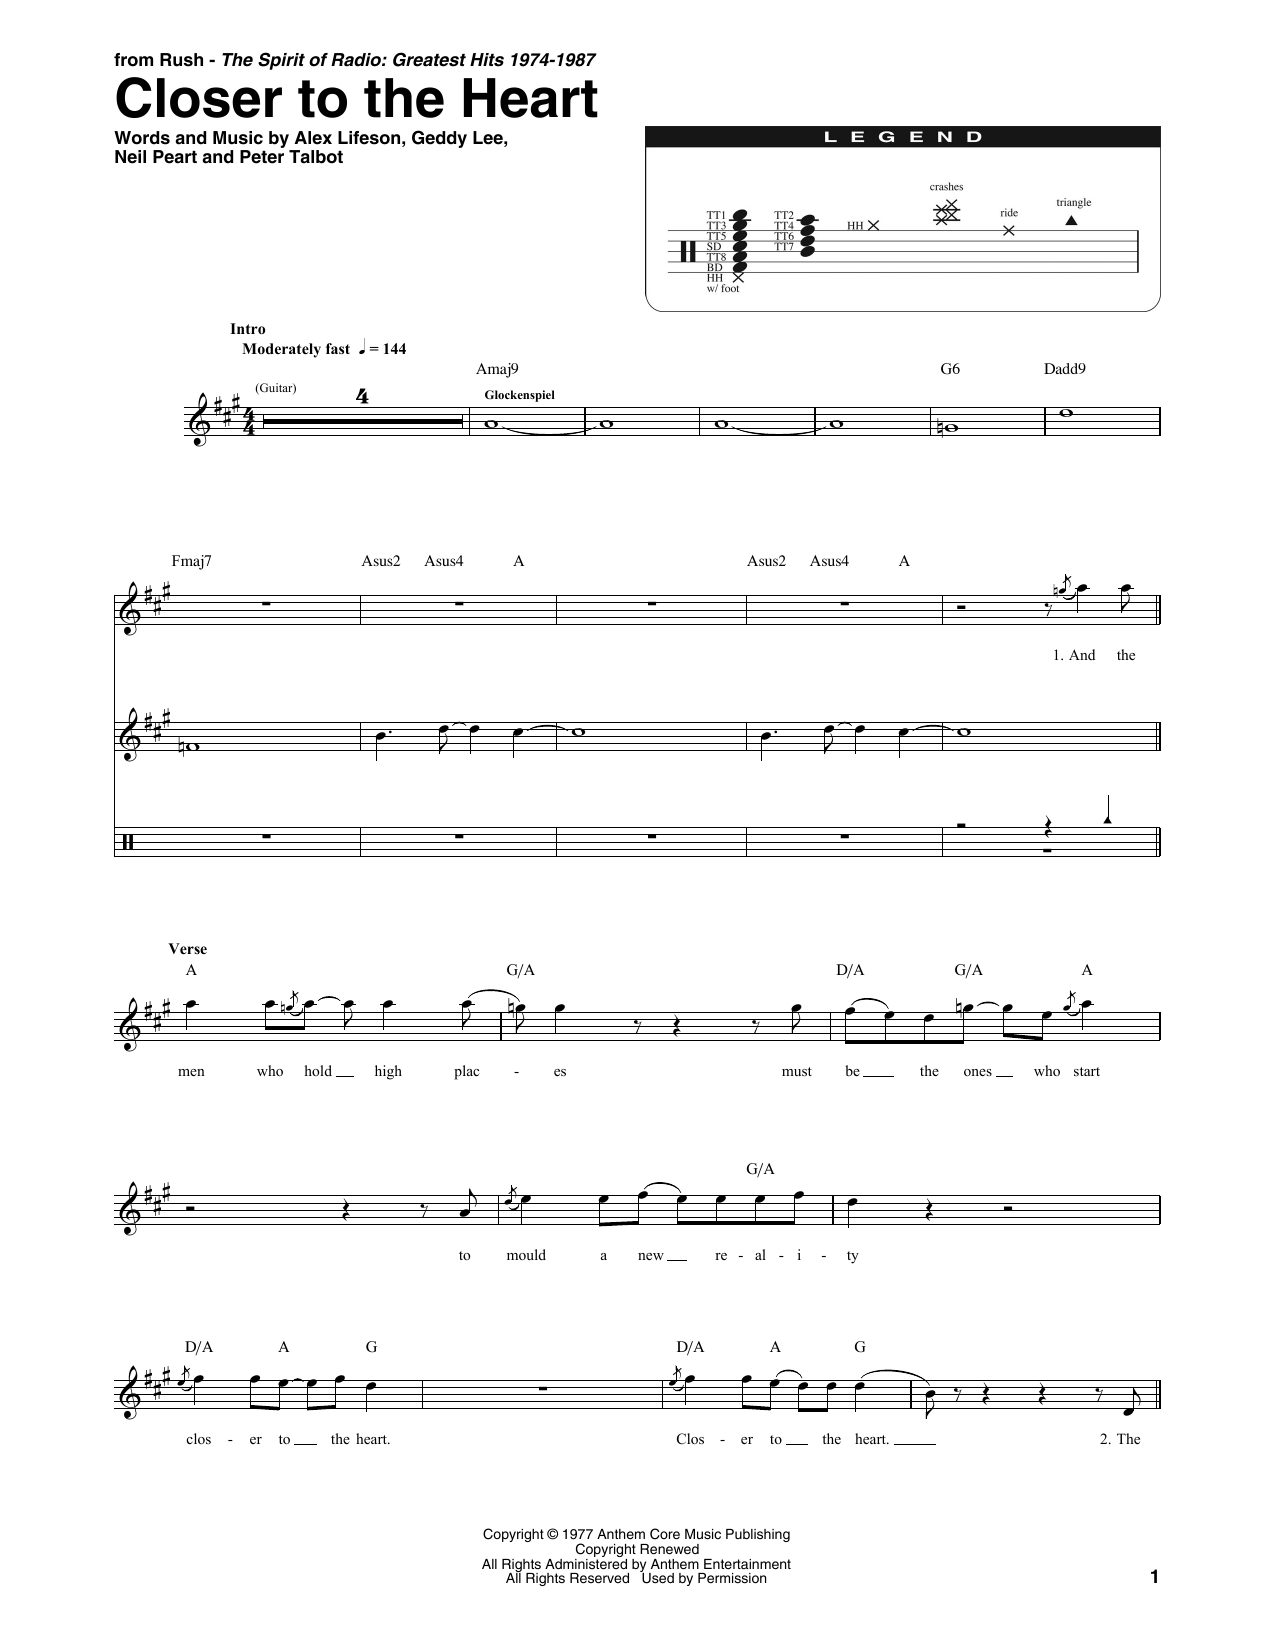 Download Rush Closer To The Heart Sheet Music